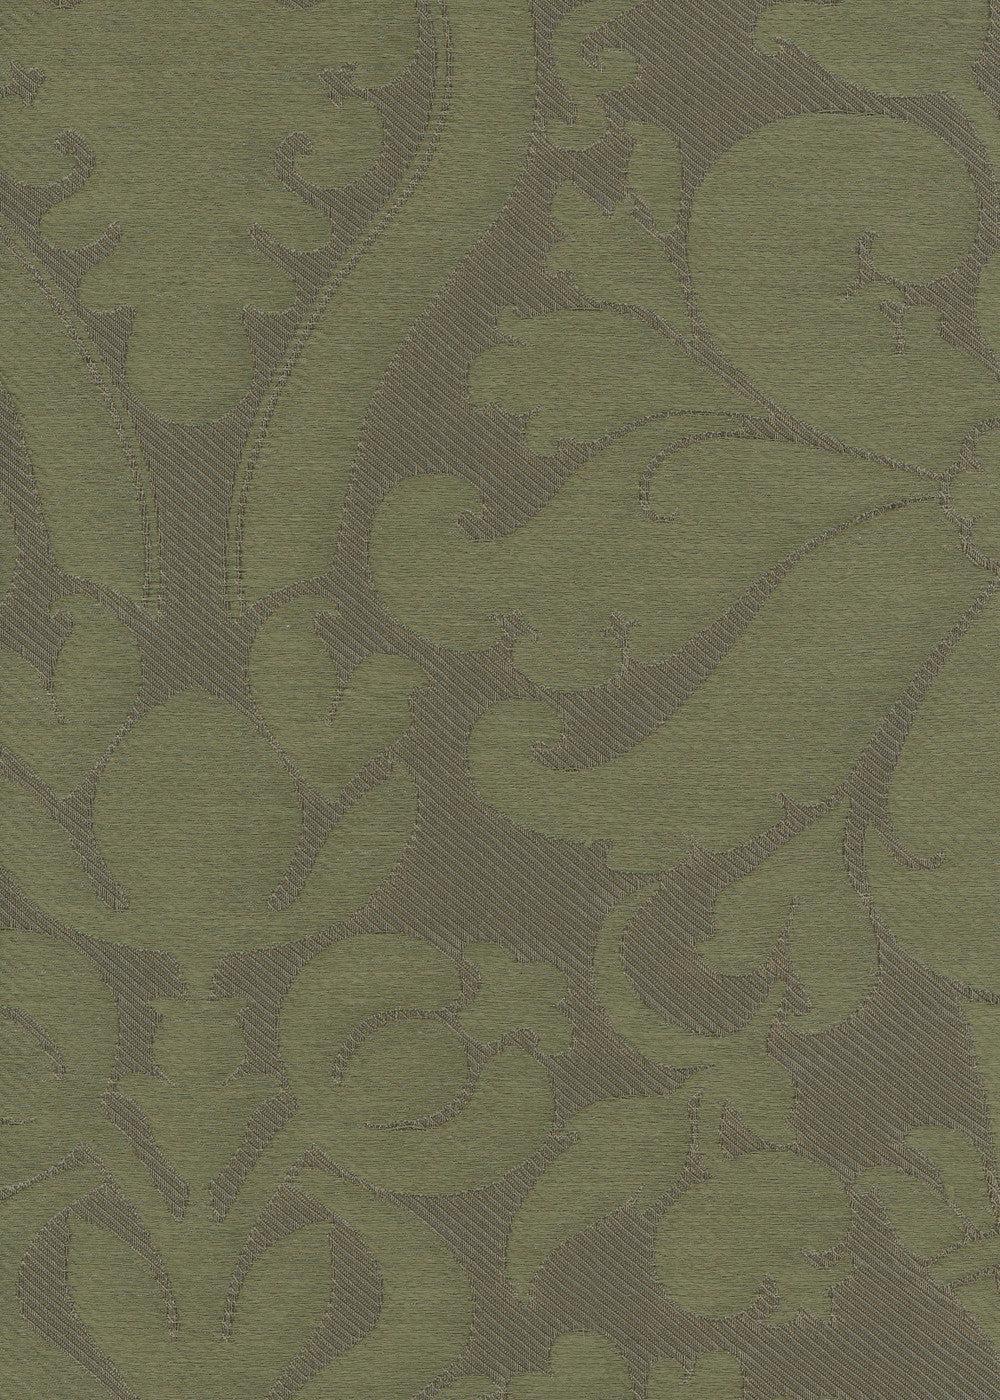 green fabric with a woven damask design